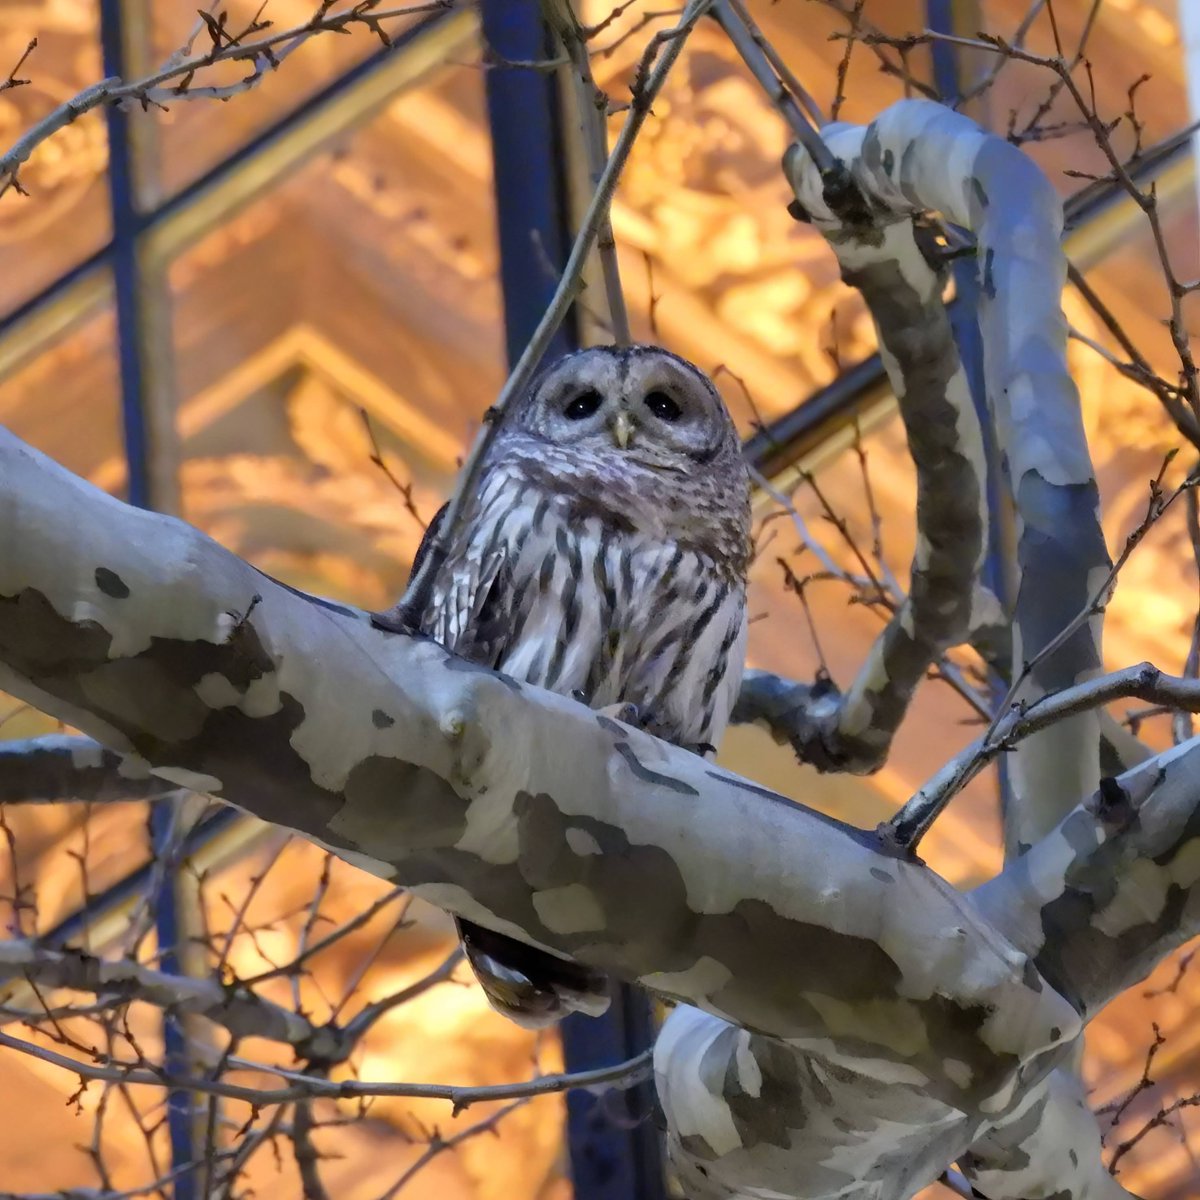 It's the two-year anniversary 🎉 of the 'library owl,' one of the most delightful and unexpected of all time, a Barred Owl that spent several days near the New York Public Library in Bryant Park. 🦉 ❤️ 📚